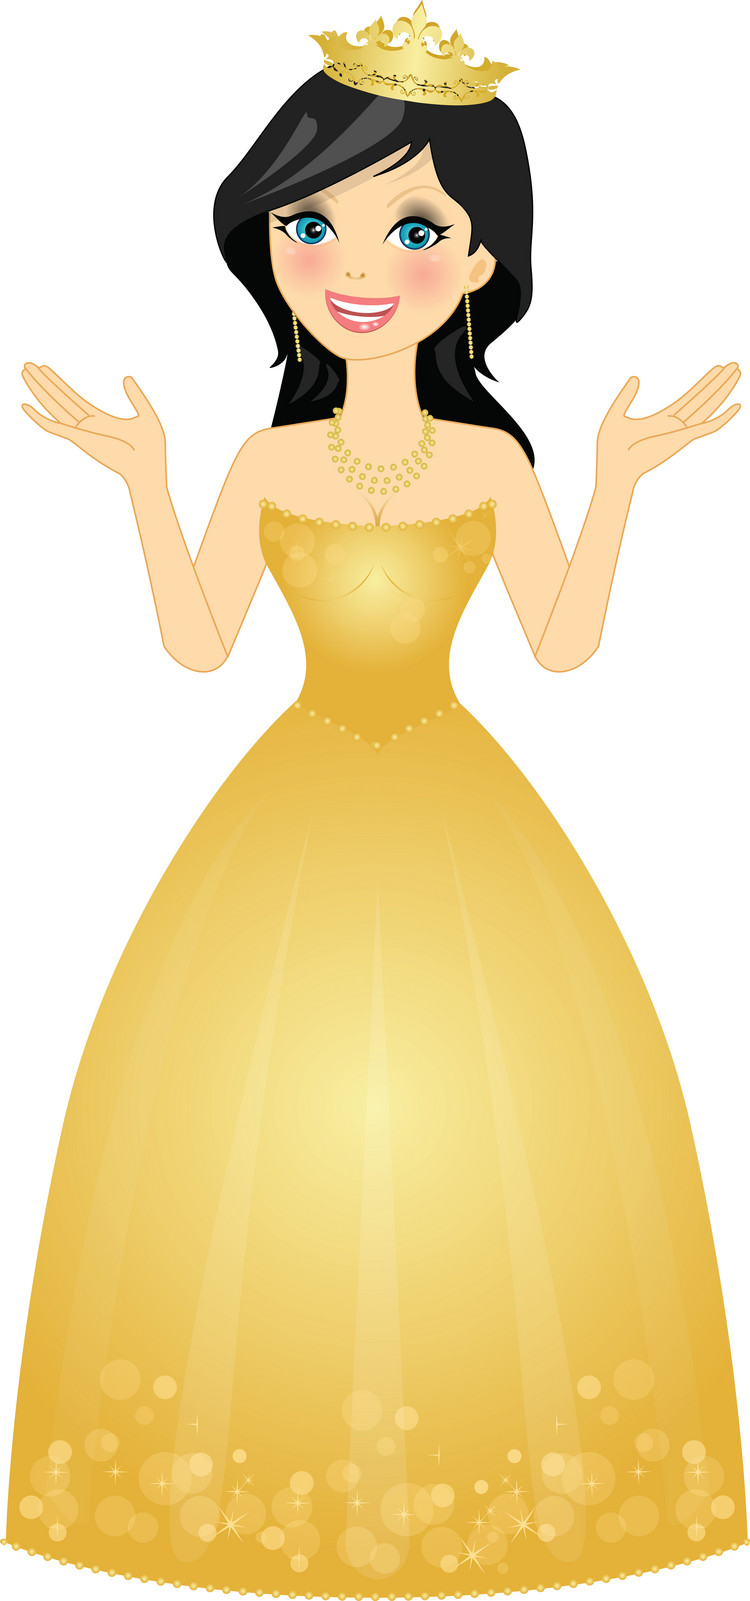 queen esther clipart free - photo #11